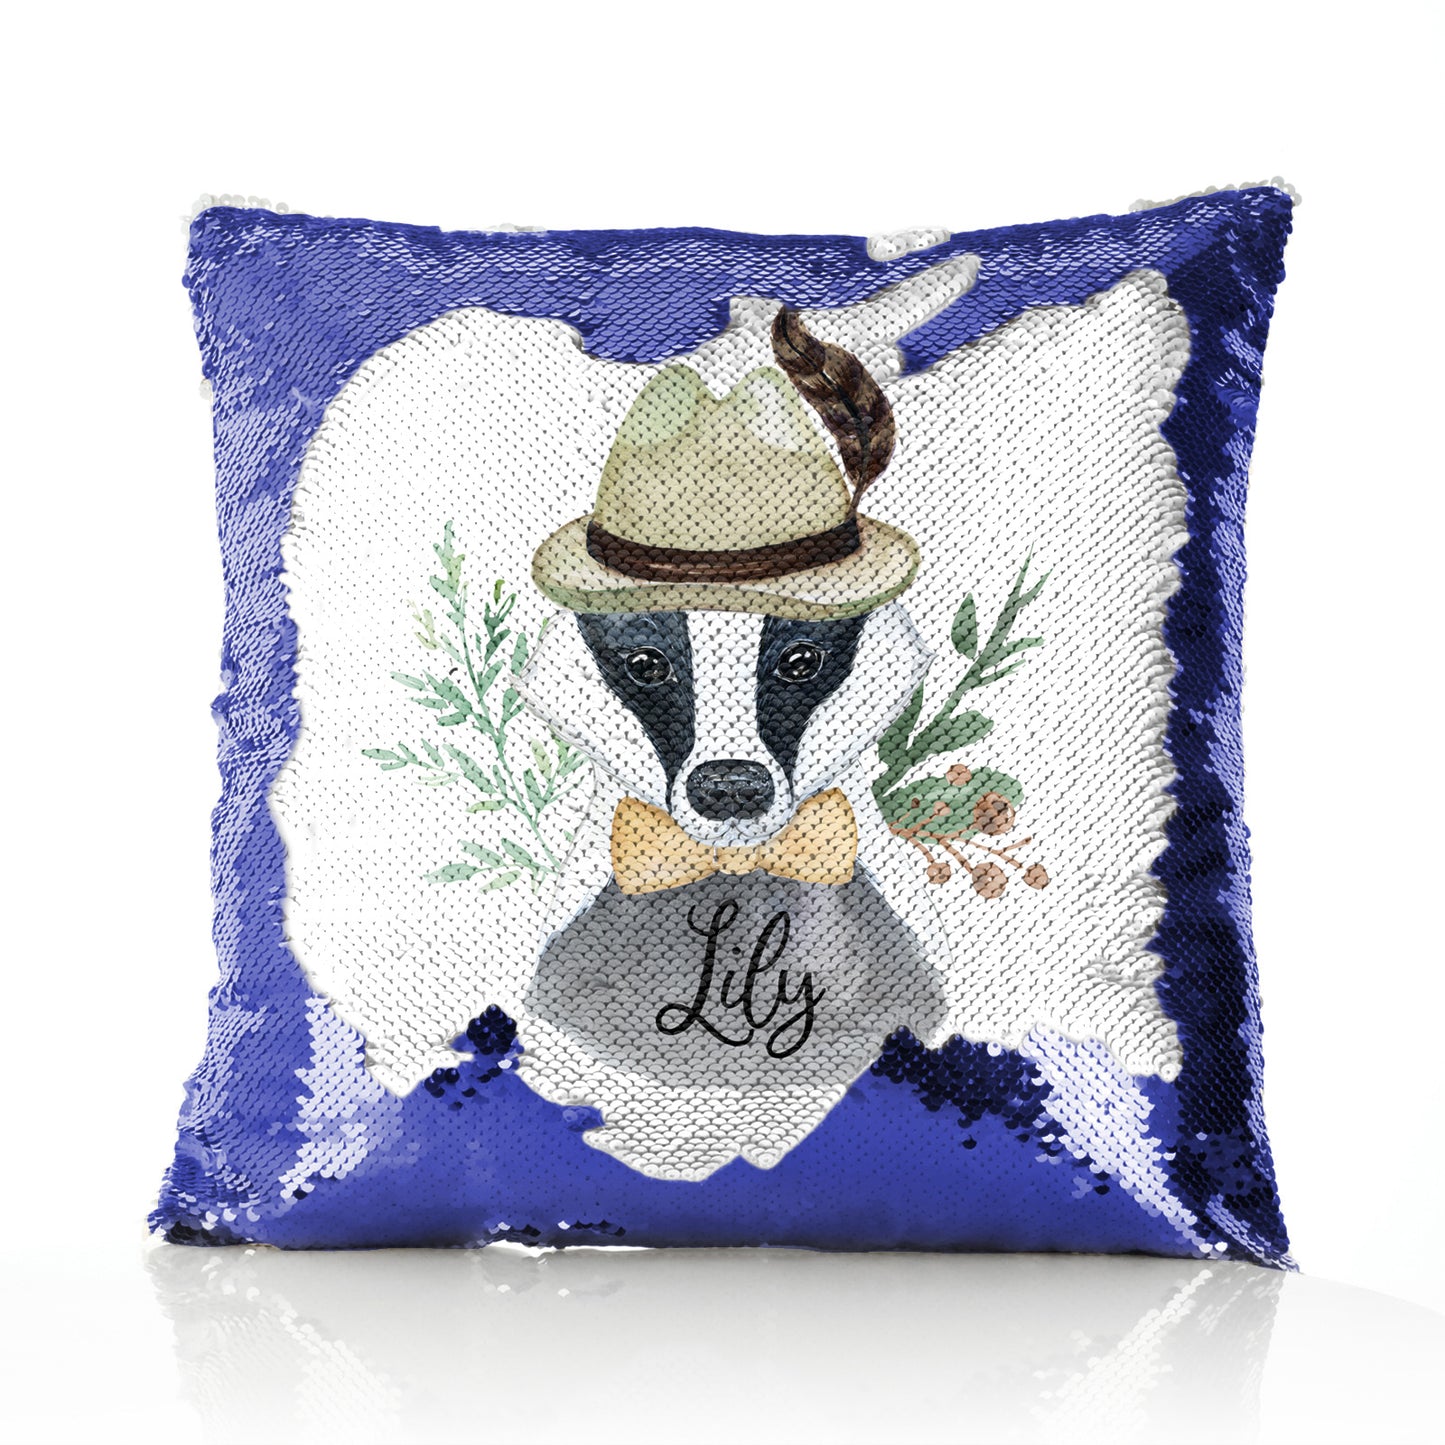 Personalised Sequin Cushion with Badger Feather Hat and Cute Text